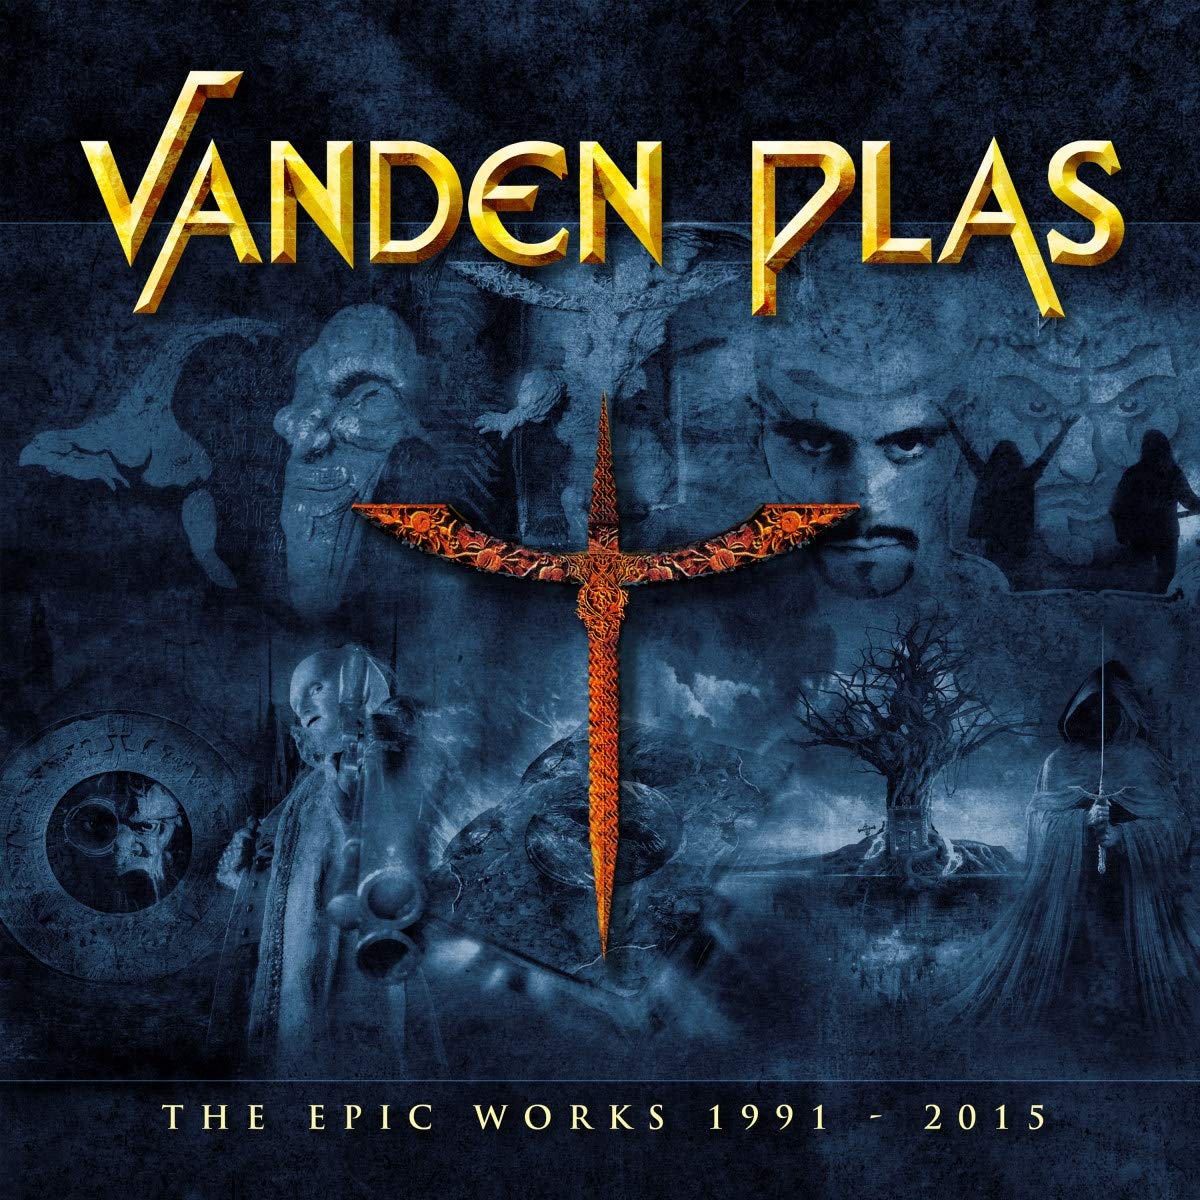 Vanden Plas-The Epic Works 1991-2015-(FR BS 965)-LIMITED EDITION BOXSET-11CD-FLAC-2019-WRE